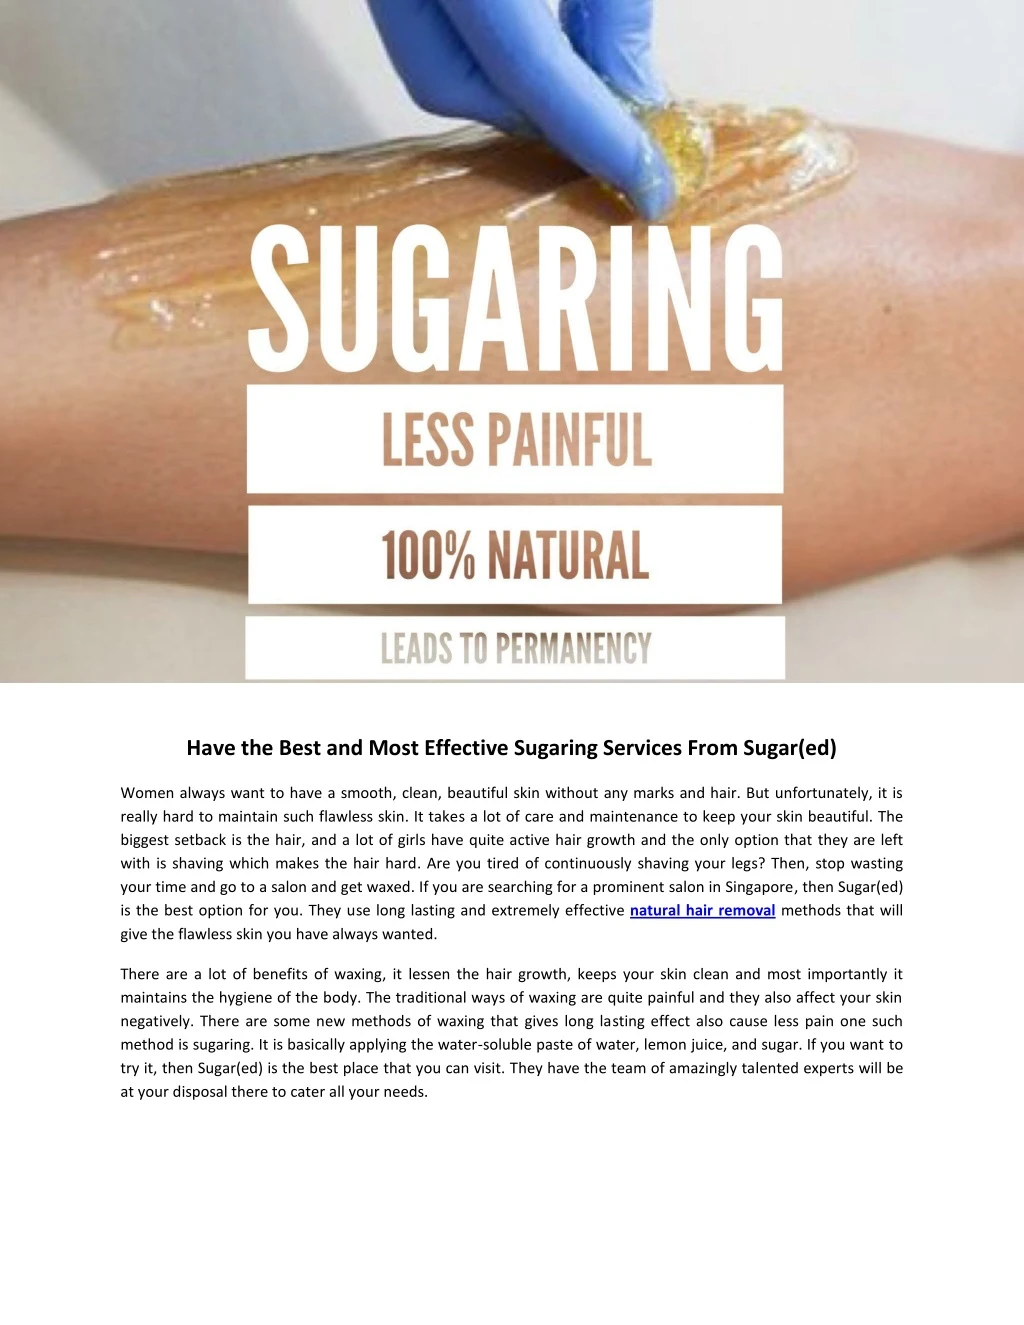 have the best and most effective sugaring